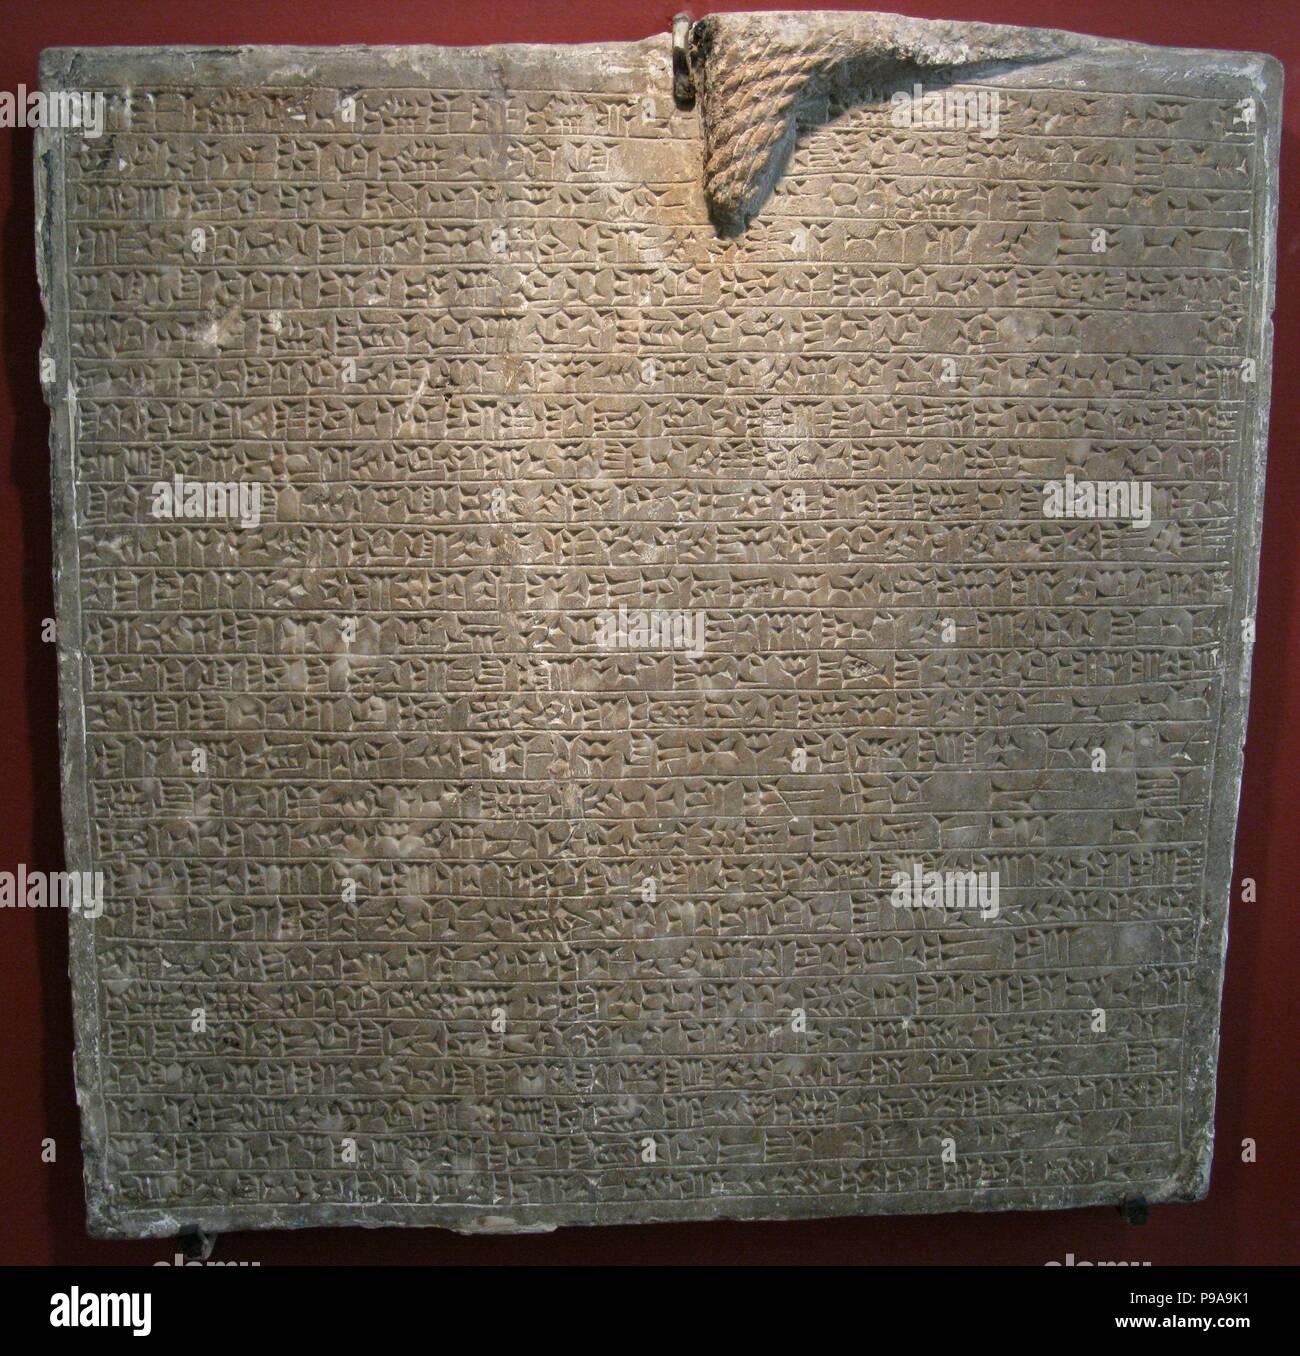 Inscribed slab from the palace of Sargon II in Dur-Sharrukin, Khorsabad. Museum: State Hermitage, St. Petersburg. Stock Photo